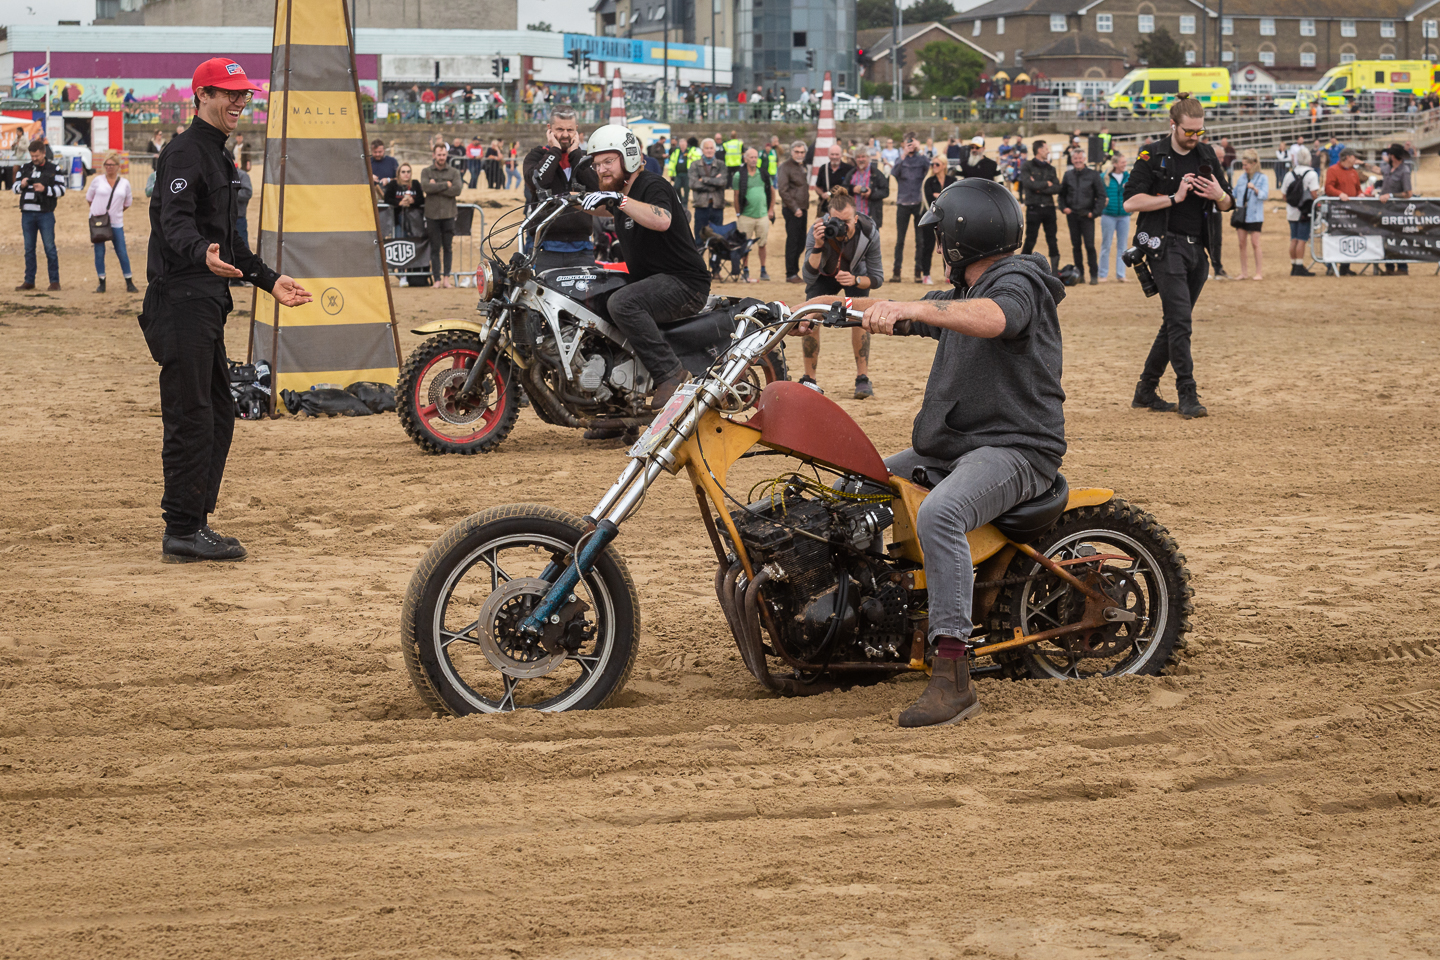 Chopper motorcycles racing on sand